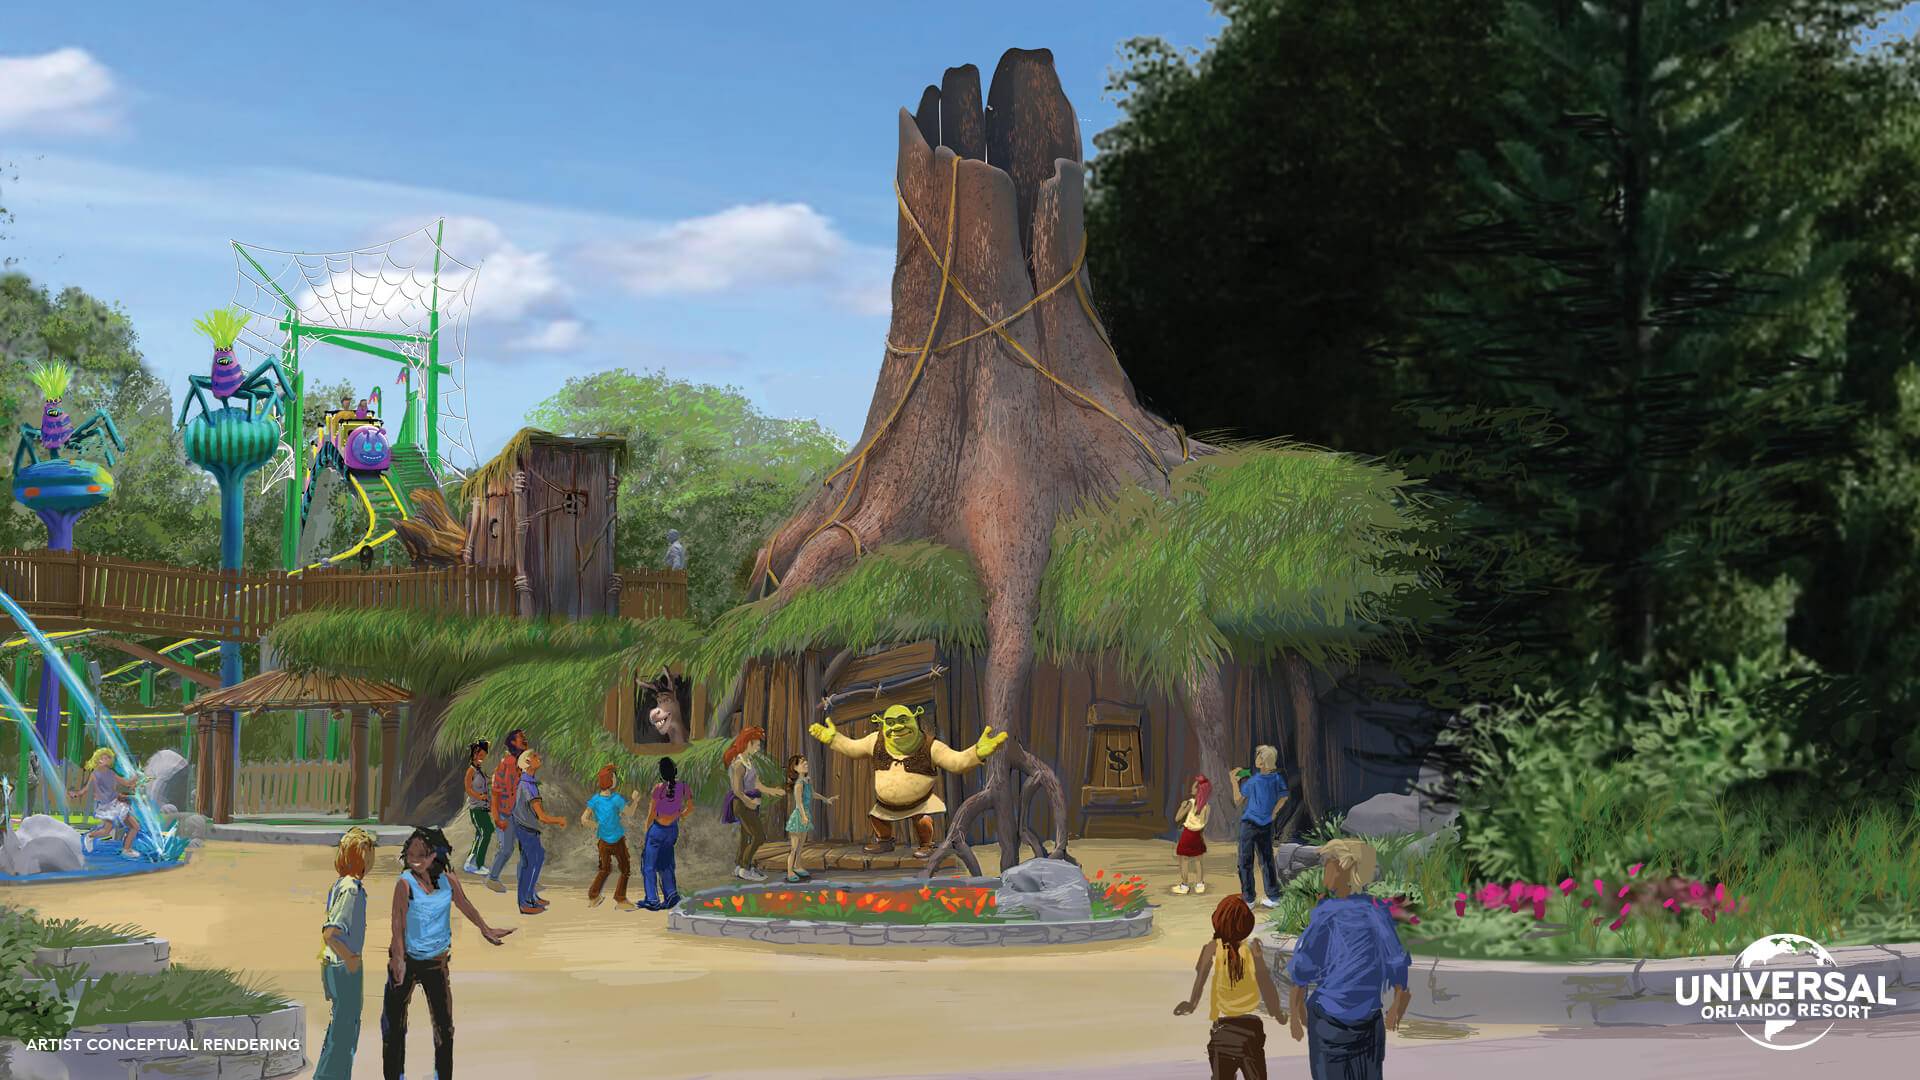 New Details Emerge About Universal Orlando's DreamWorks Land, Opening This Summer